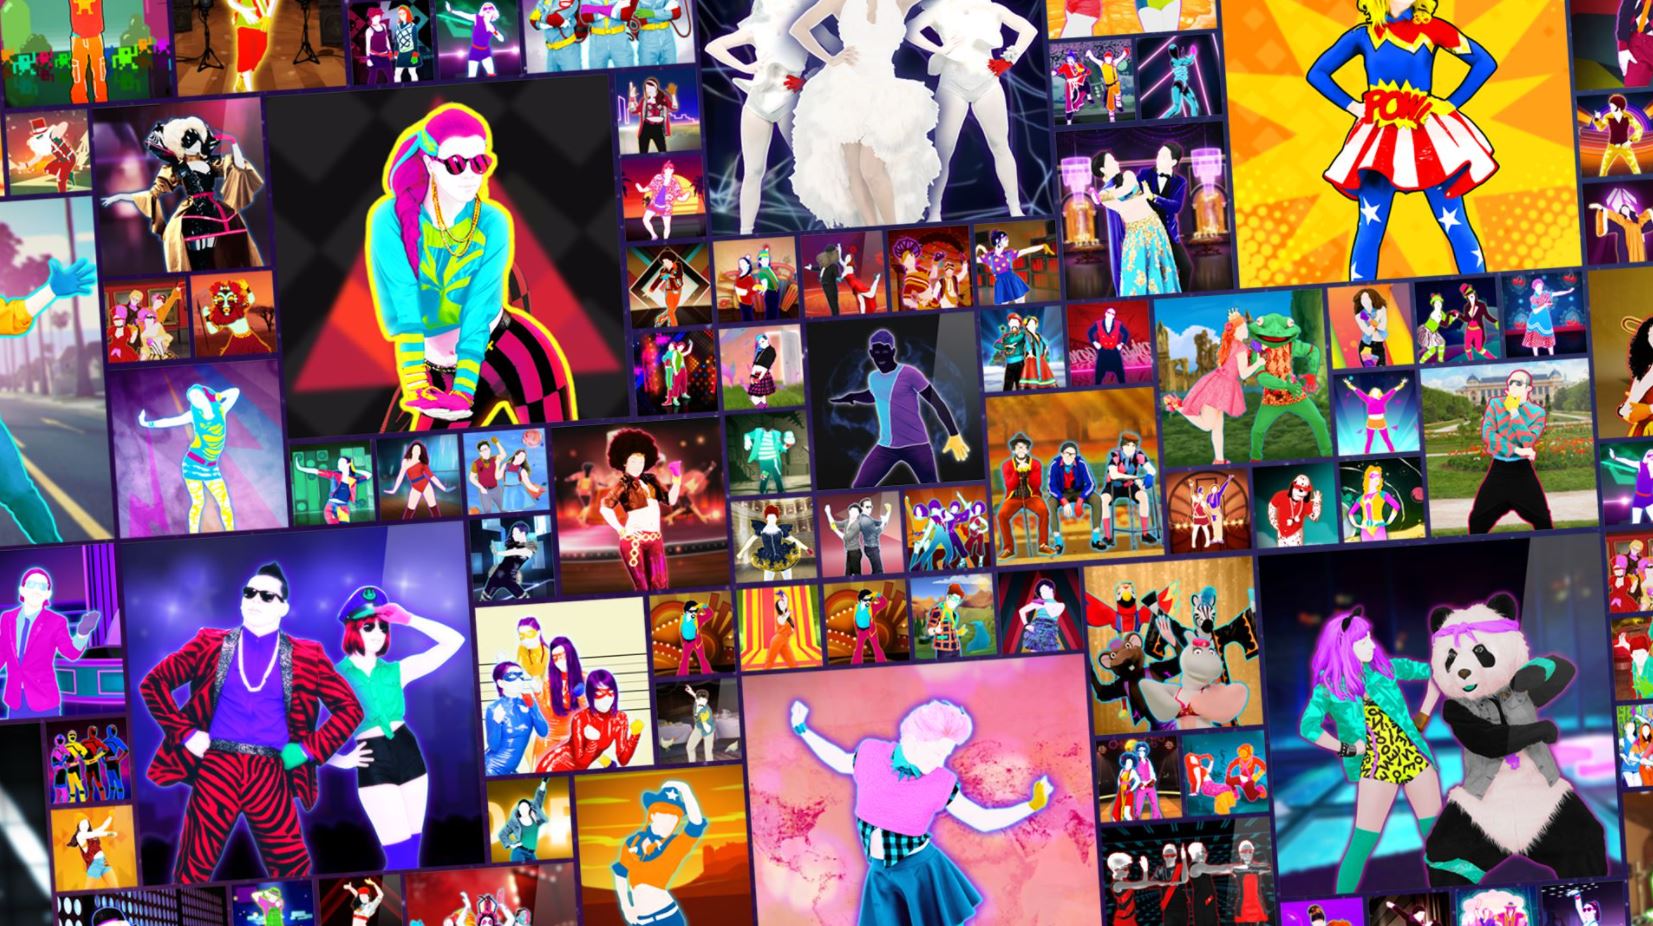 just dance 2021 song list unlimited